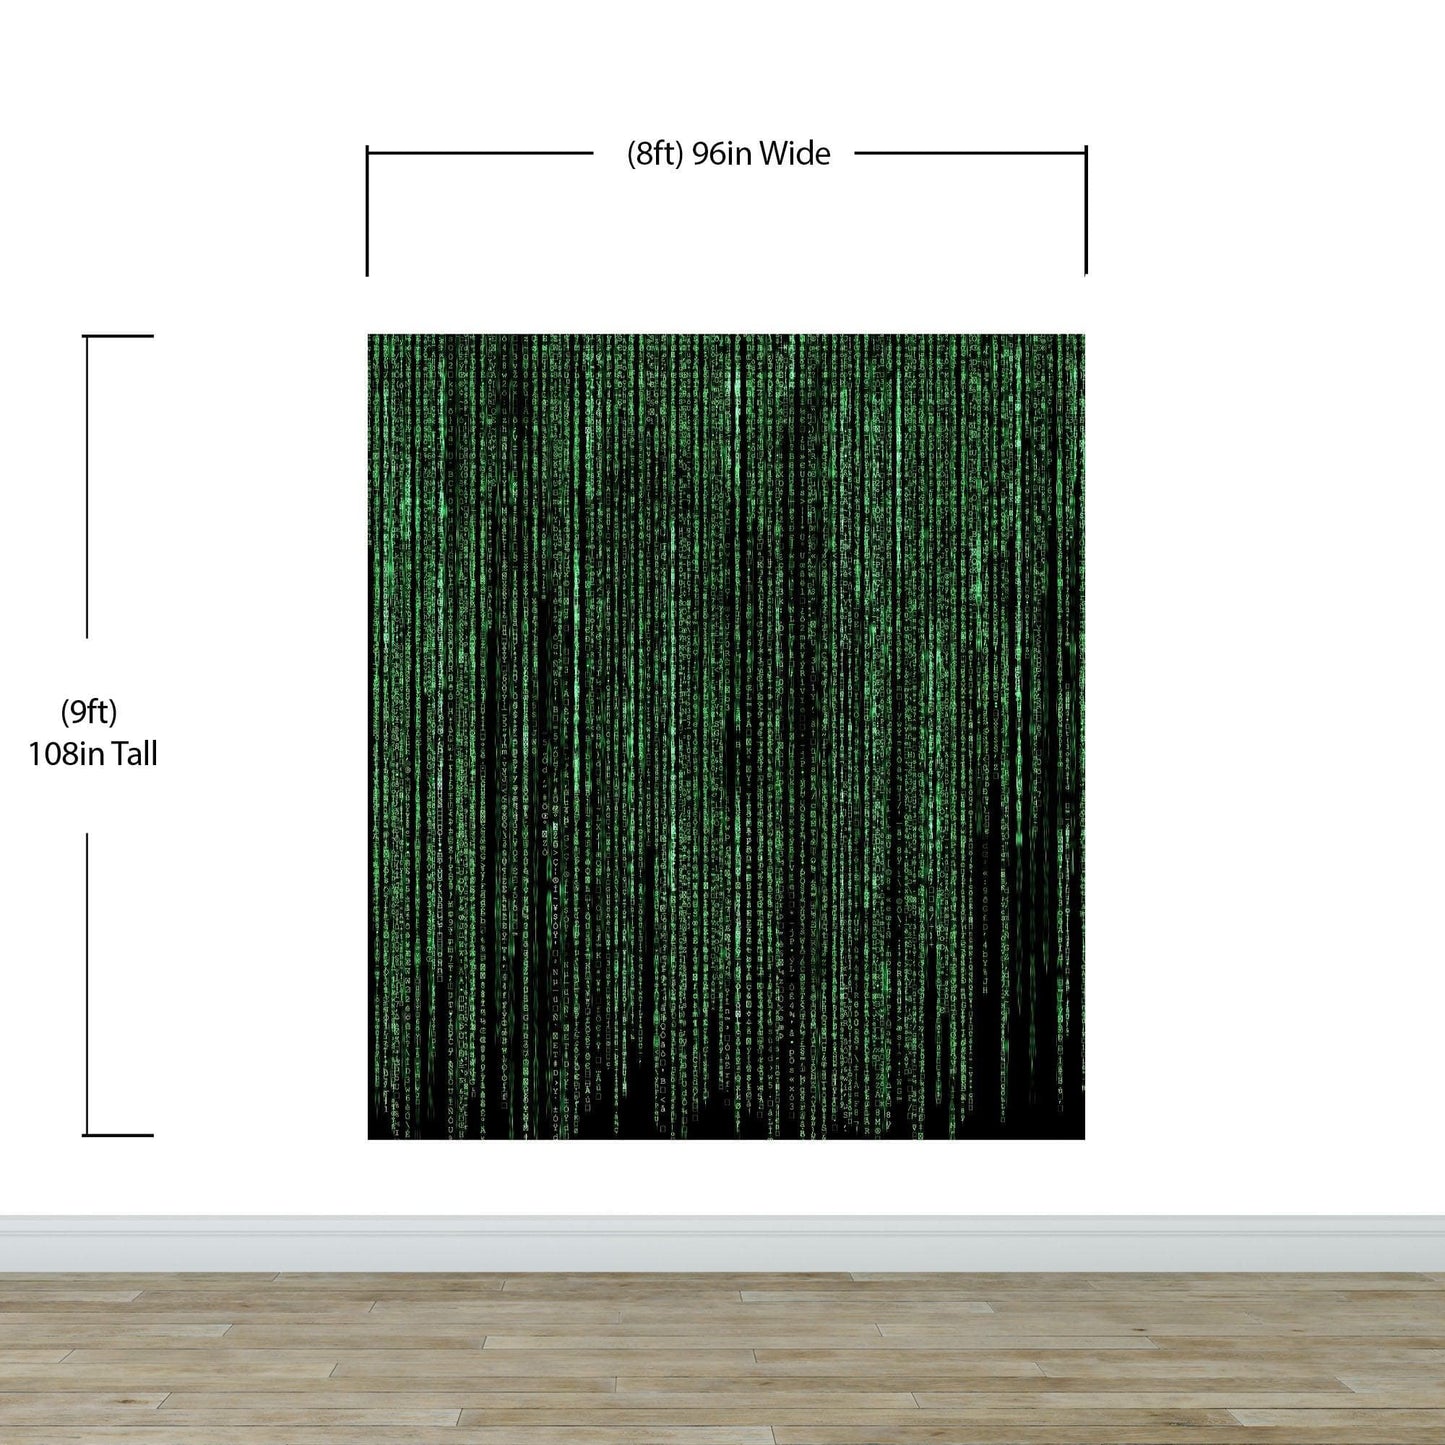 Computer Matrix Style Lines of Code Wall Mural. Science Fiction Decor. #6430